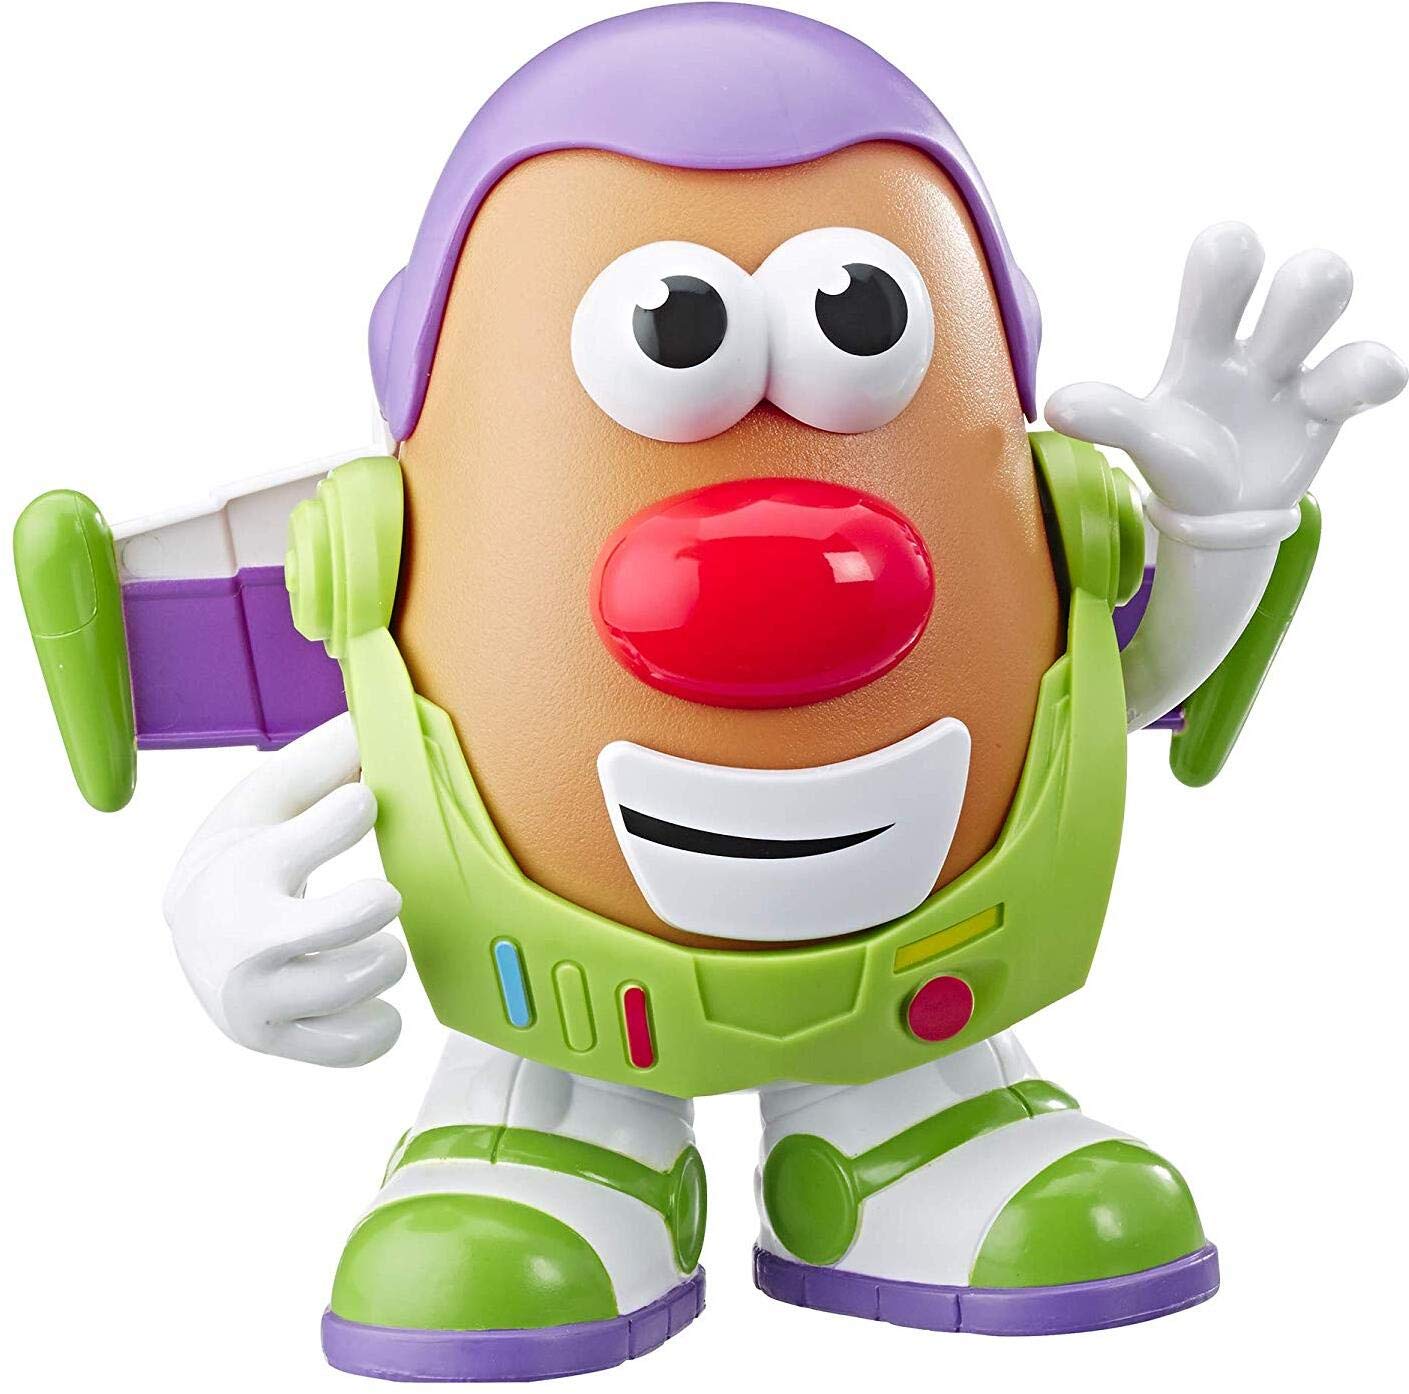 Mr Potato Head Disney/Pixar Toy Story 4 Spud Lightyear Figure Toy for Kids Ages 2 & Up